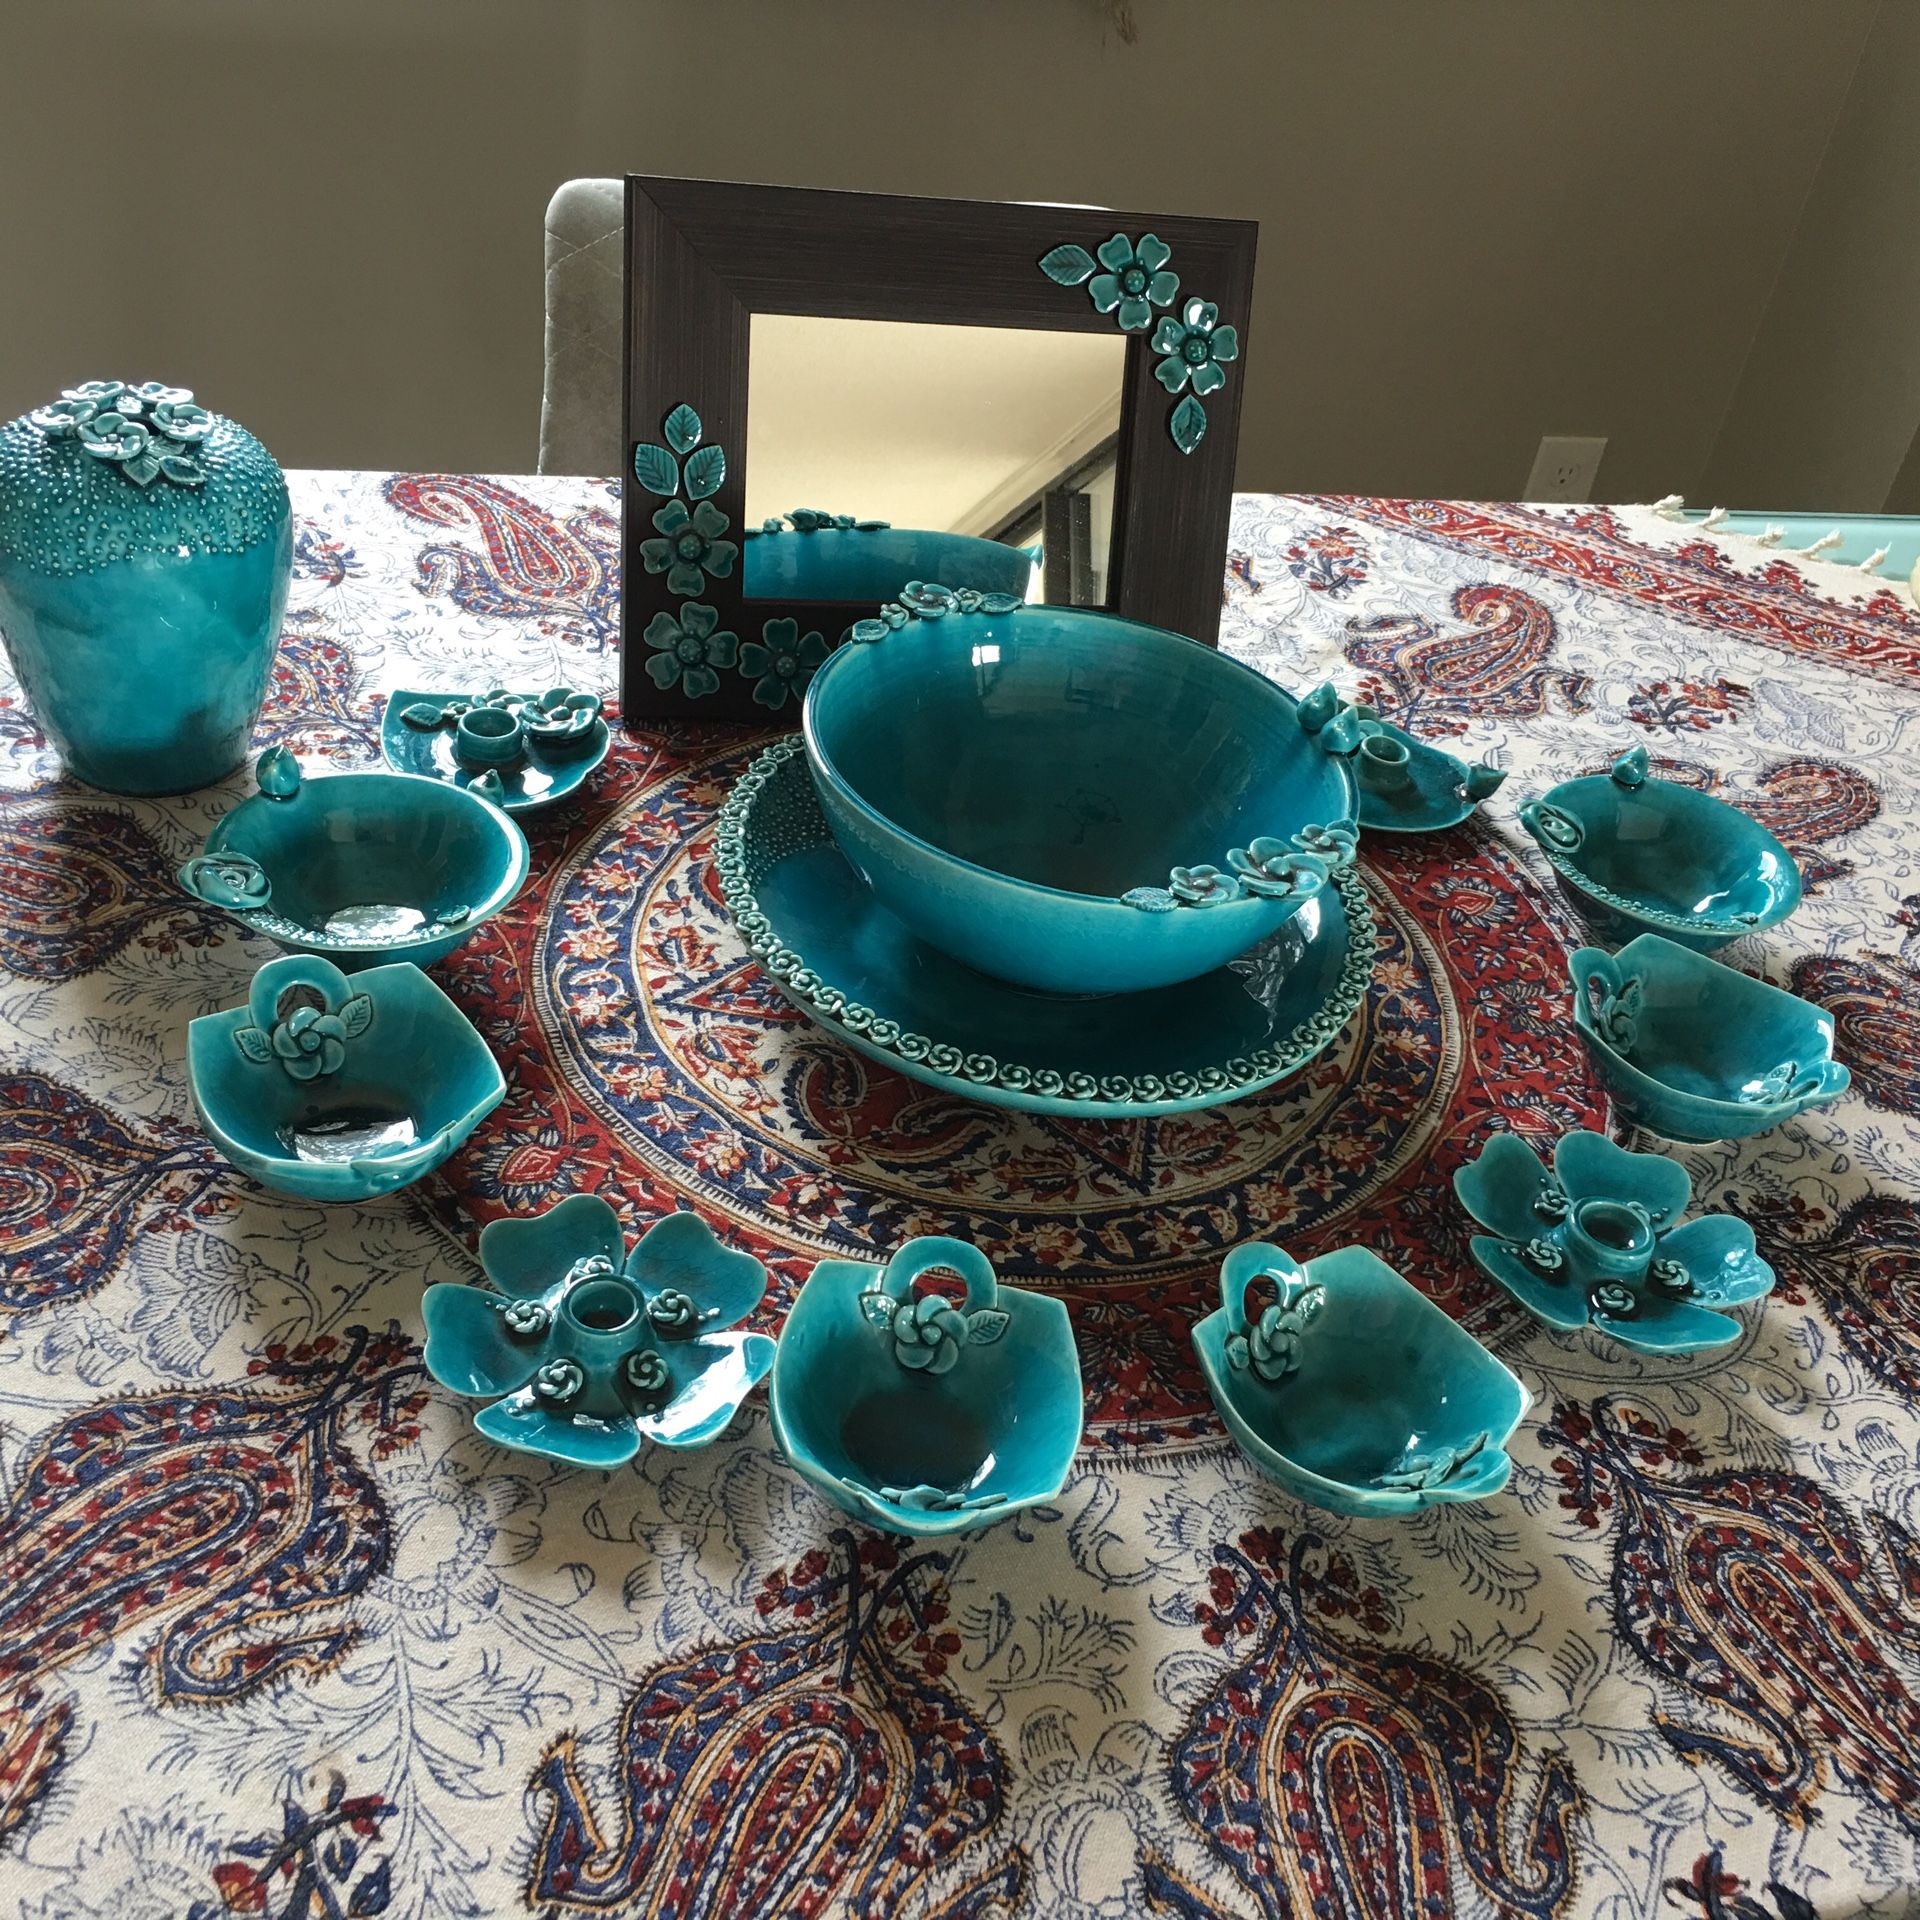 Brand new set of blue dishes for Persian Norouz for $600